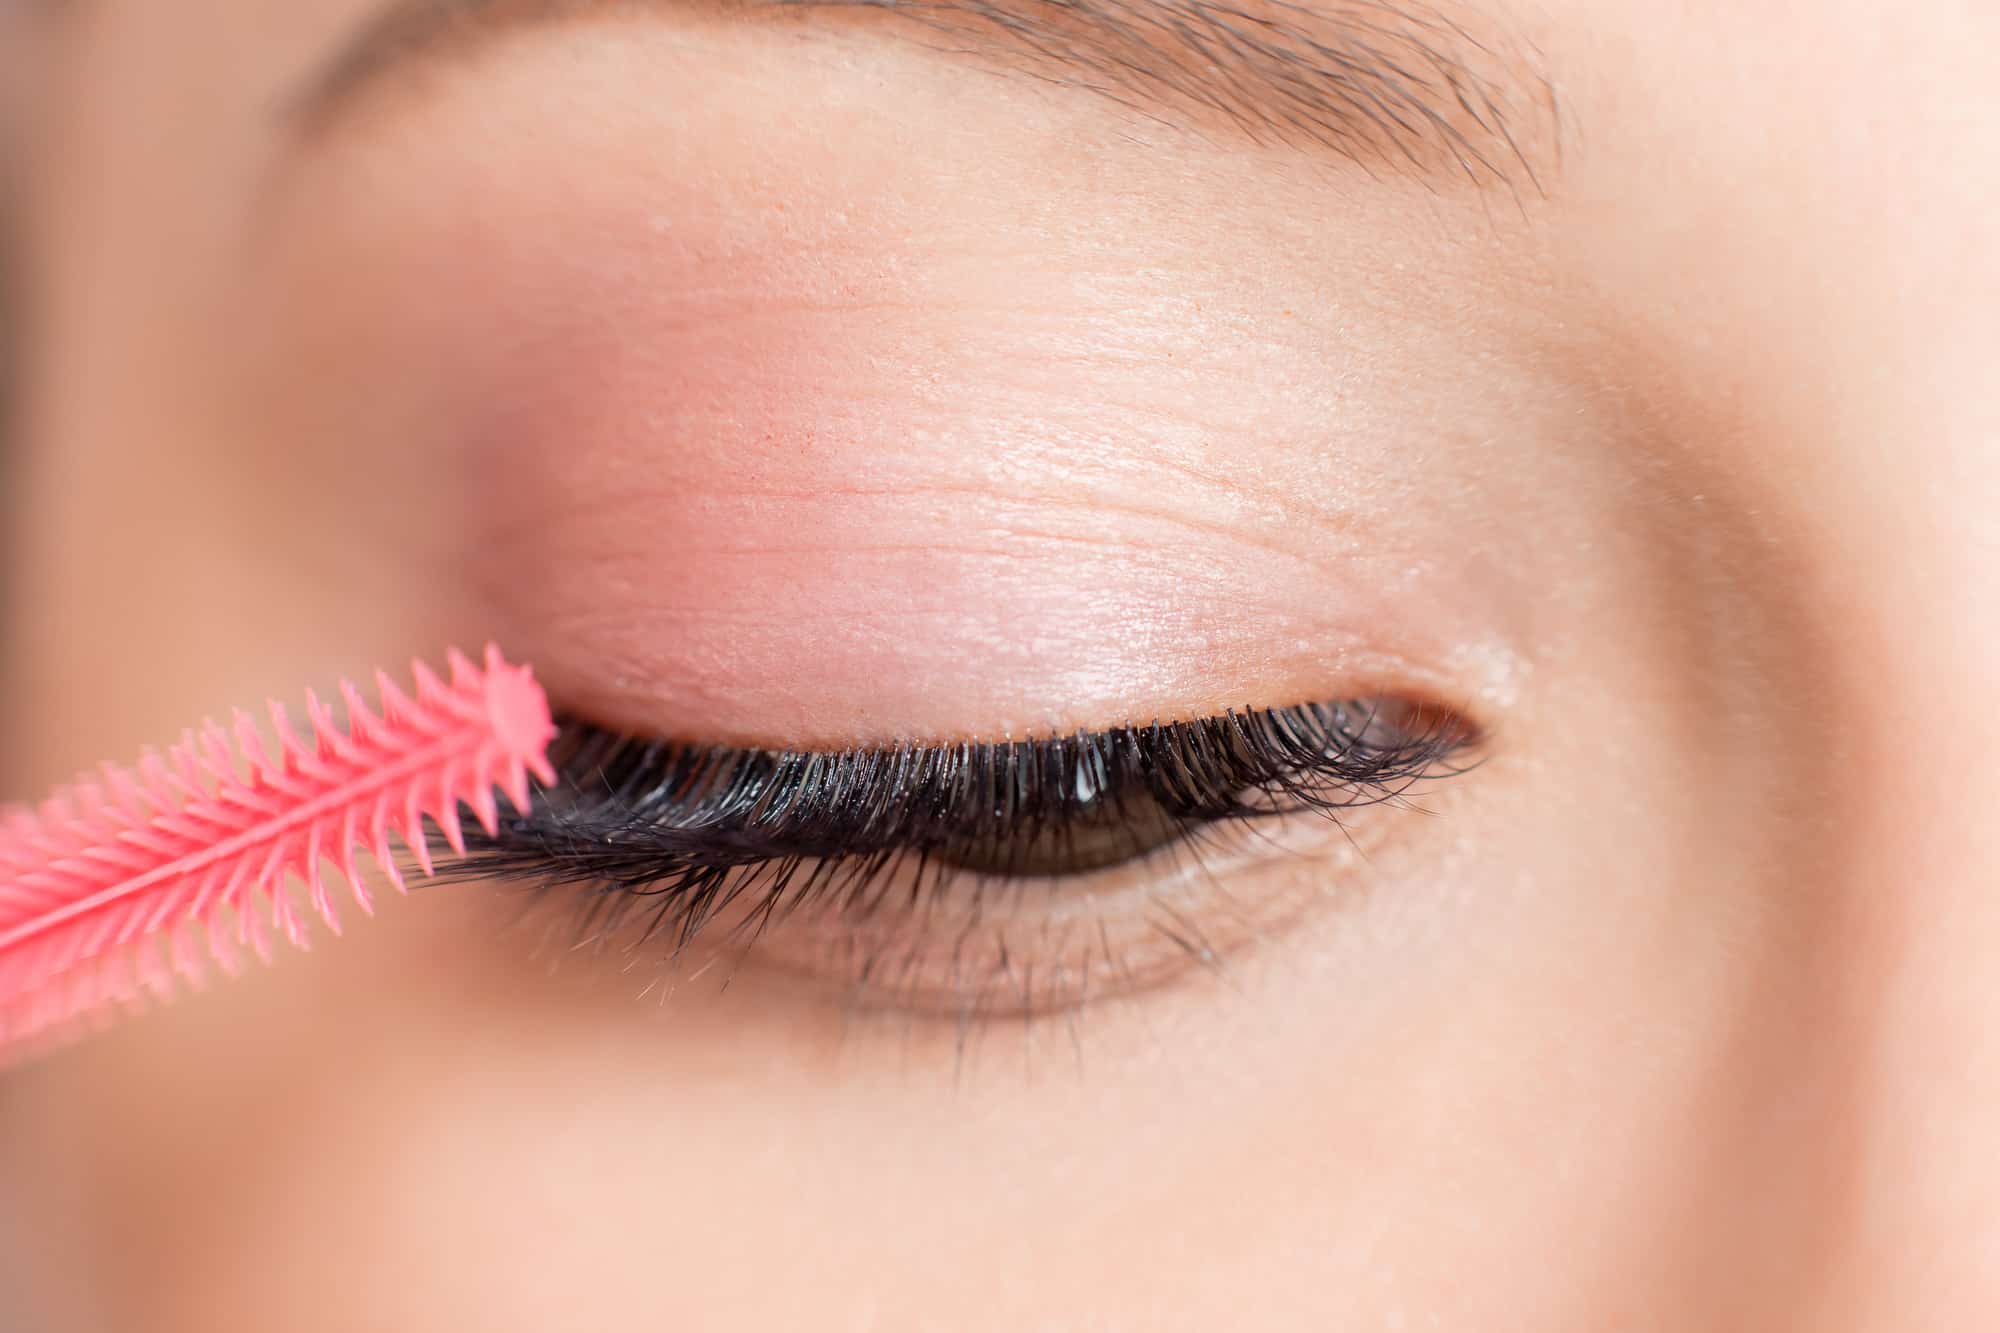 7 Eyelash Extension Aftercare You Should Know | Dreamlash